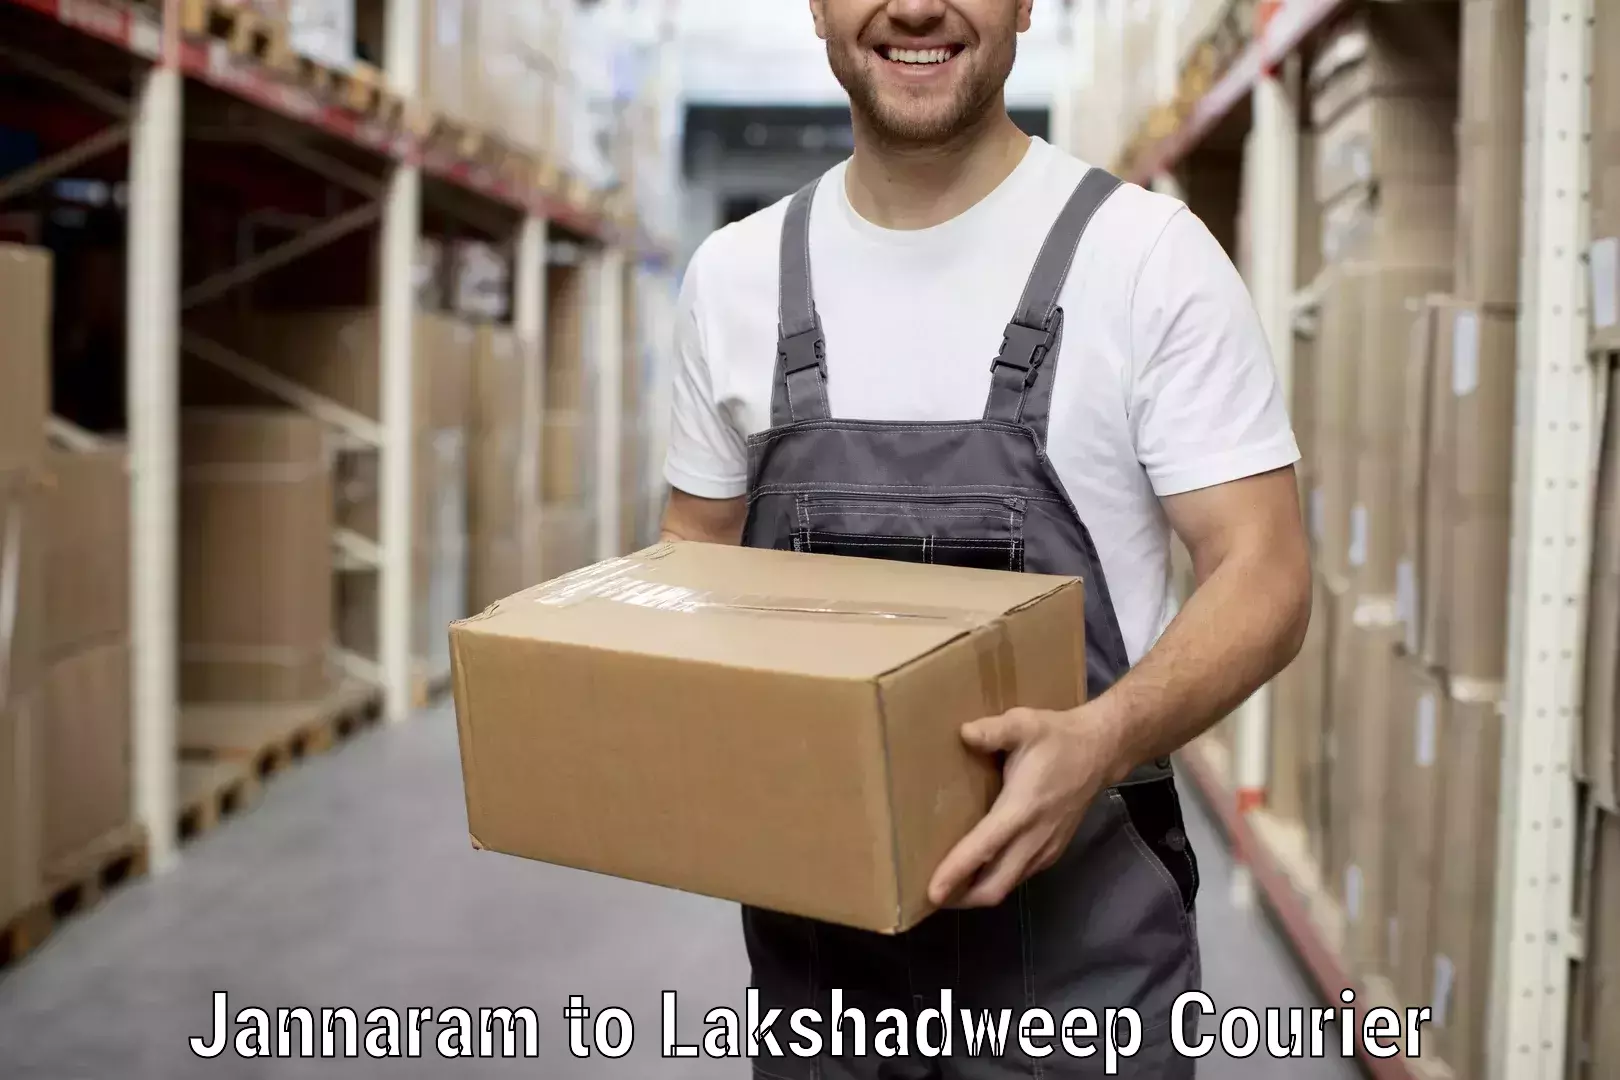 Professional furniture movers in Jannaram to Lakshadweep